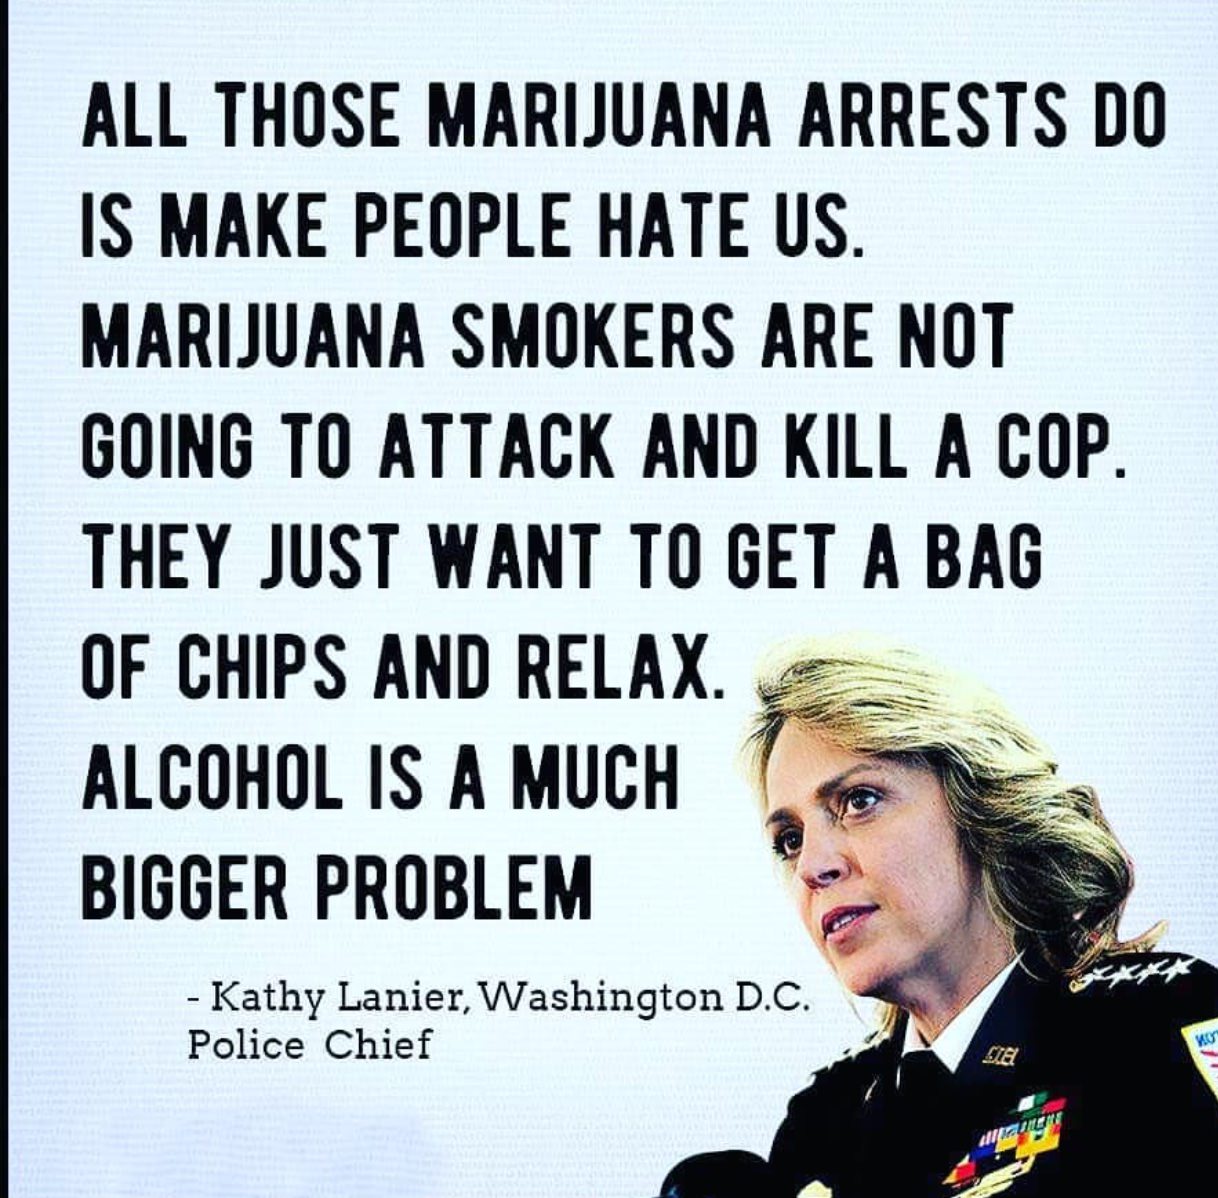 human behavior - All Those Marijuana Arrests Do Is Make People Hate Us. Marijuana Smokers Are Not Going To Attack And Kill A Cop. They Just Want To Get A Bag Of Chips And Relax. Alcohol Is A Much Bigger Problem Kathy Lanier, Washington D.C. Police Chief S